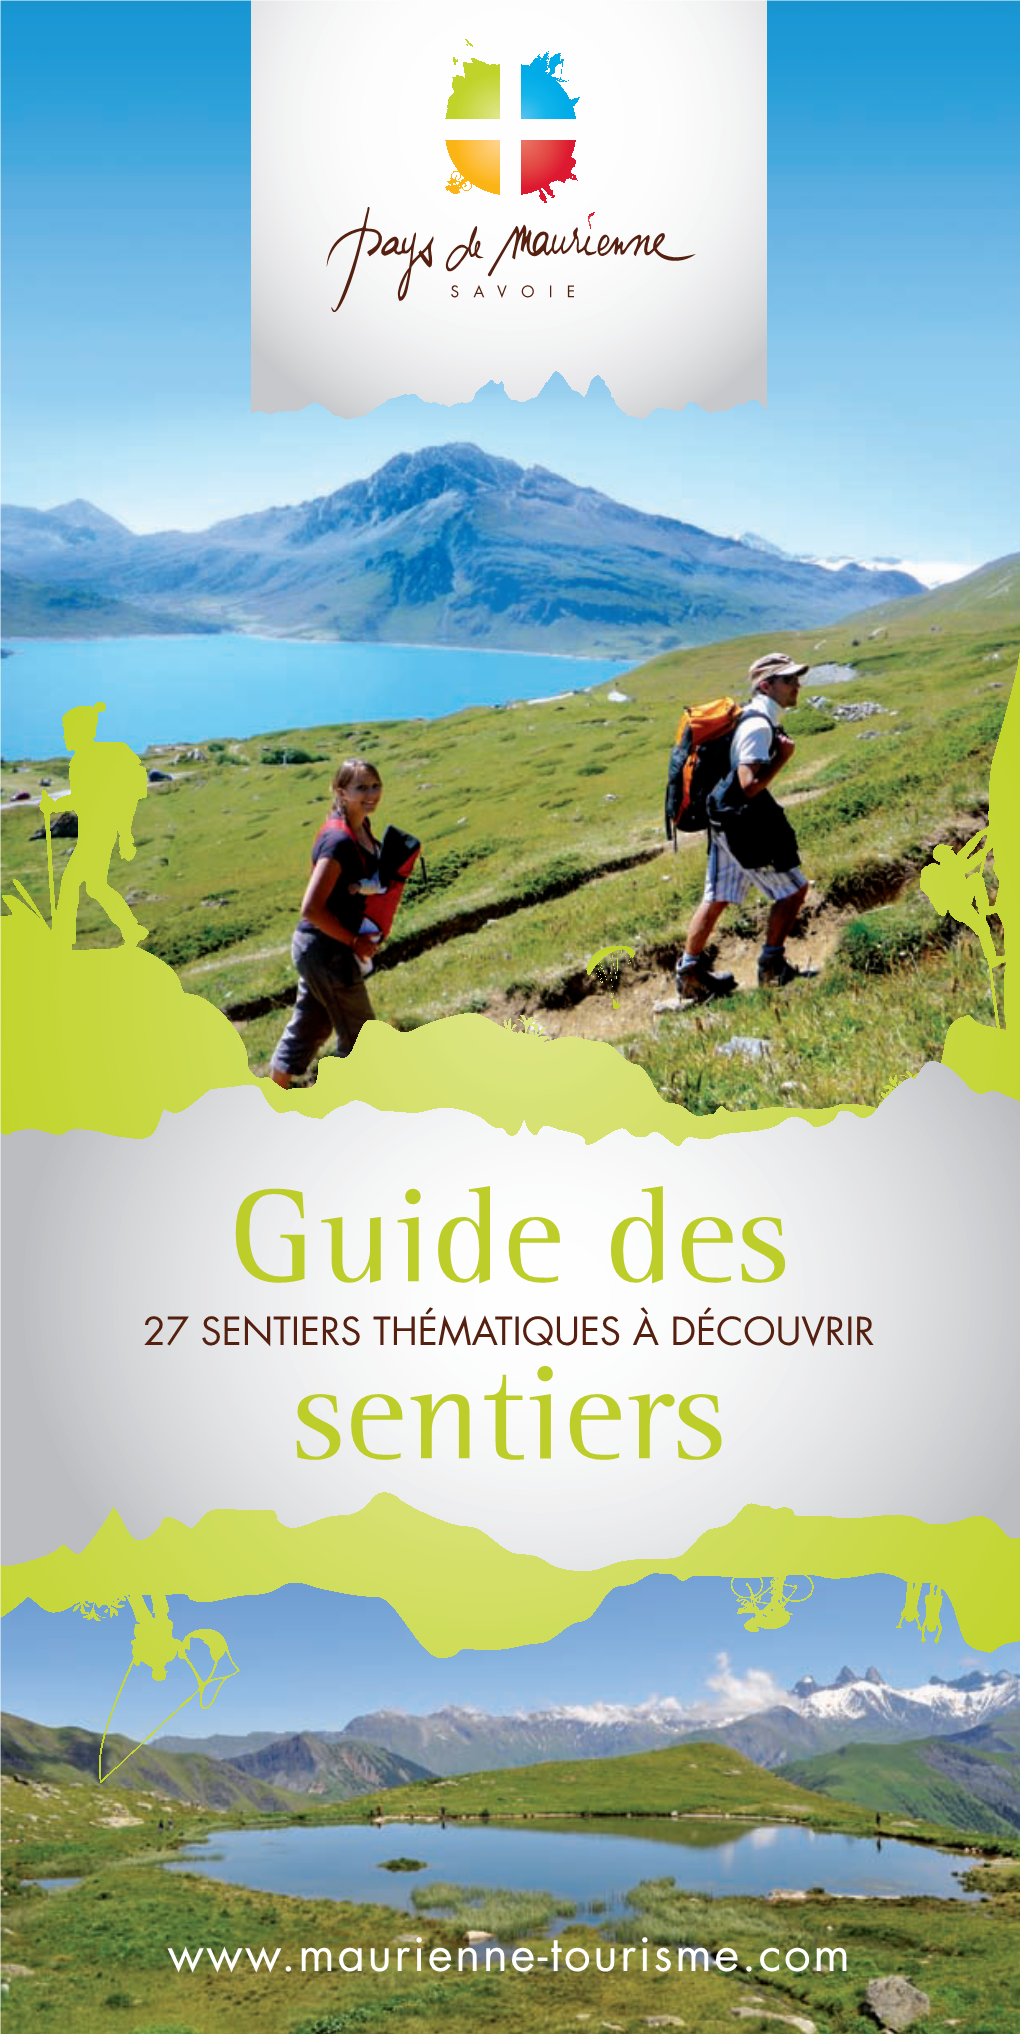 Guide Sentiers 2013:Mise En Page 1 29/04/13 14:41 Page2